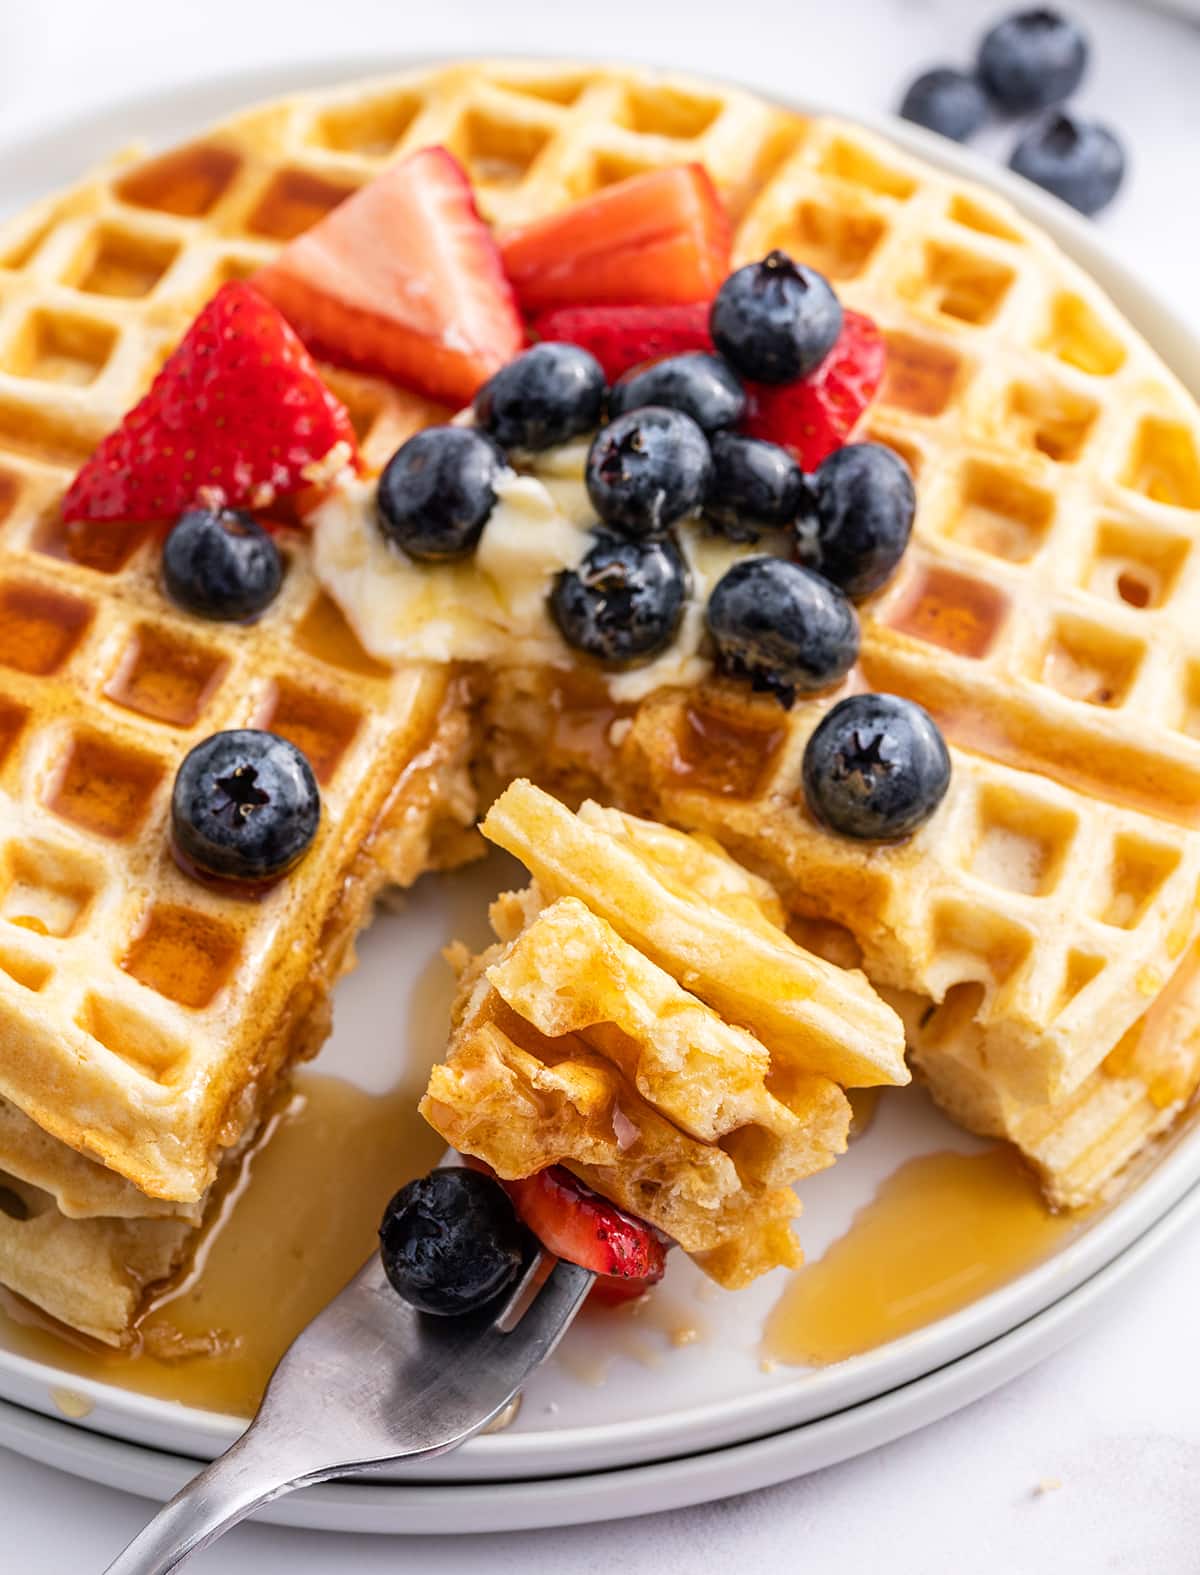 A plate of butter waffles topped with berries, and a bite of waffles on a fork next to it.